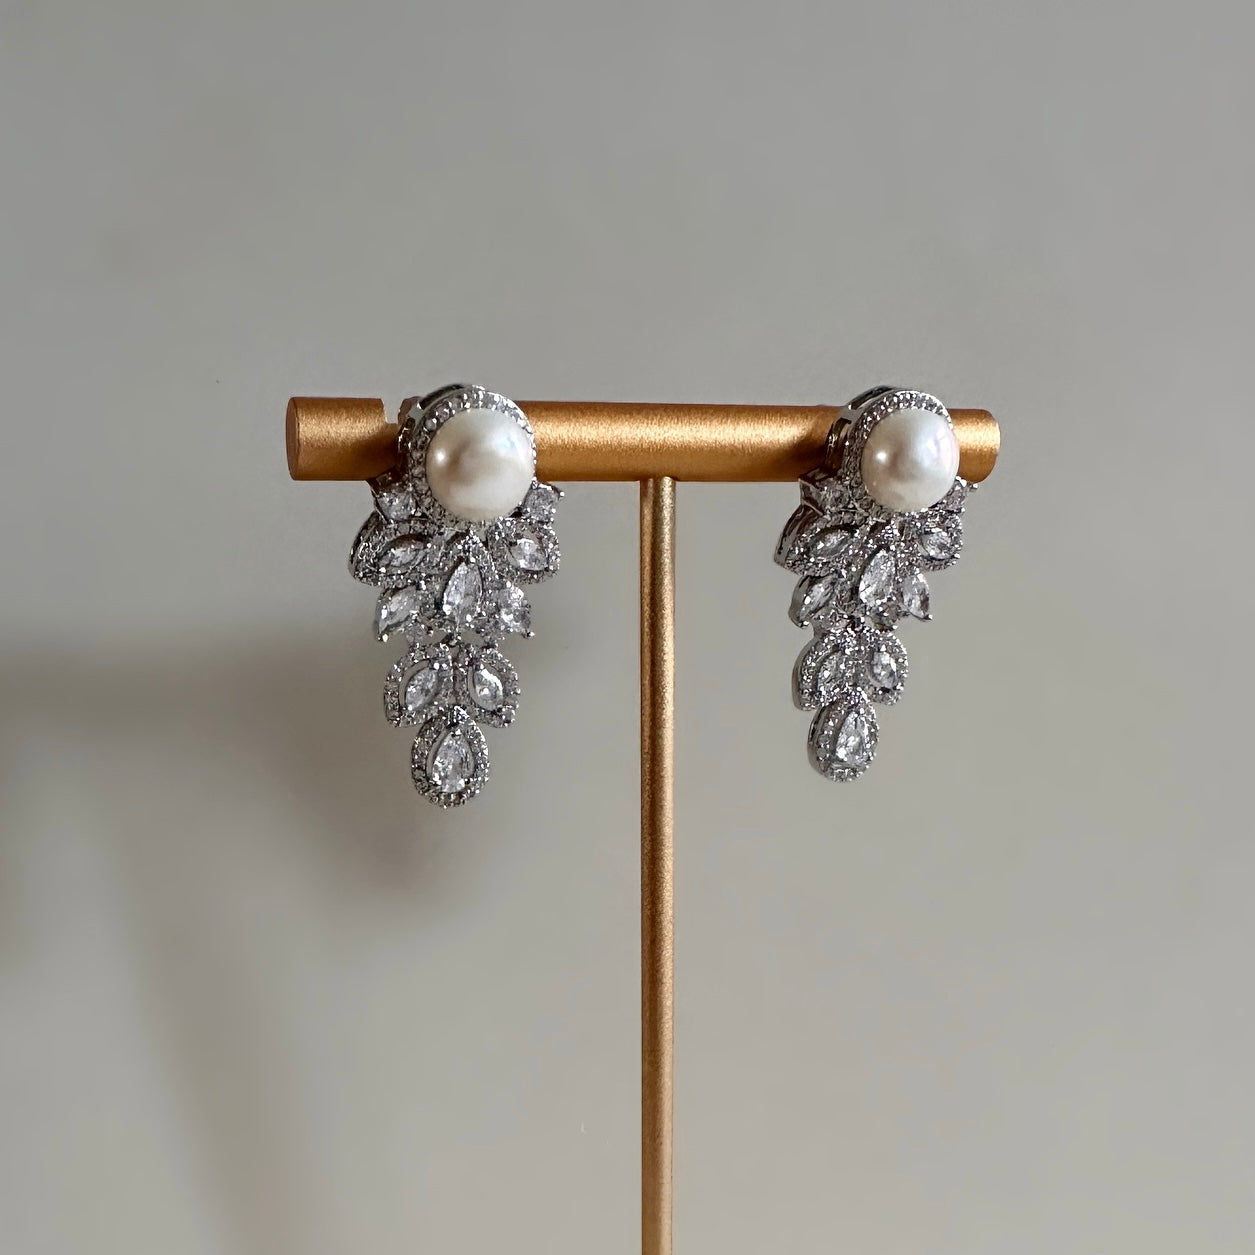 These stunning Hinali Pearl Crystal Earrings are the perfect accessory for any look. Featuring cz crystals for maximum sparkle and shine, a vintage-style, and a pearlescent accent, these earrings are sure to make a statement. Earring drop 3.5cm